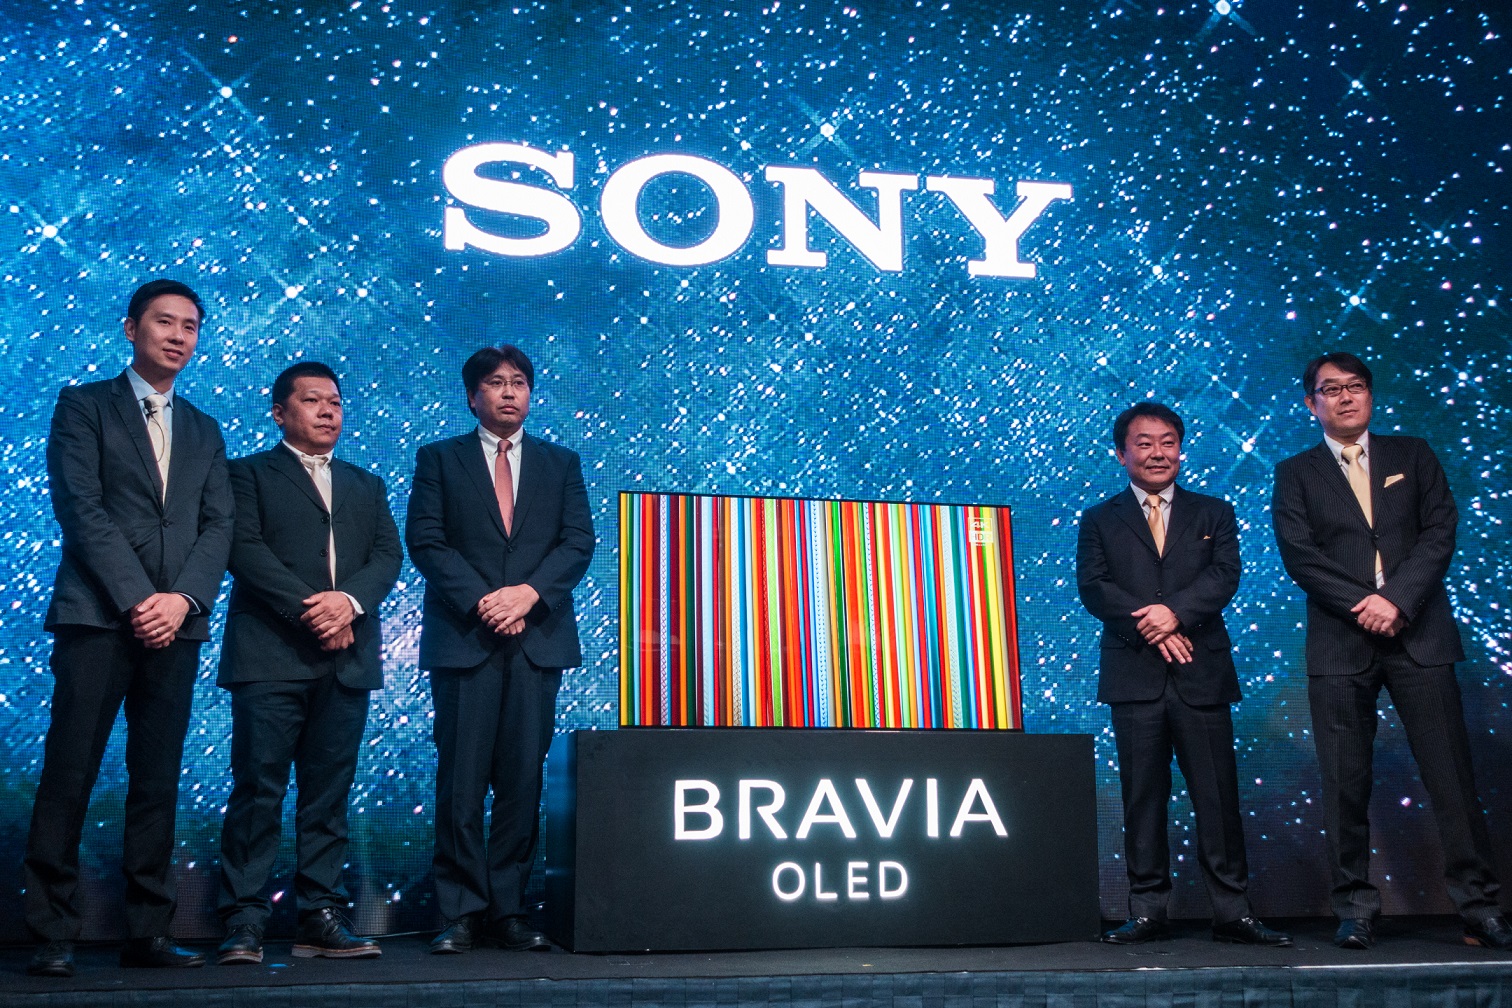 Sony launches 4K HDR TV series 